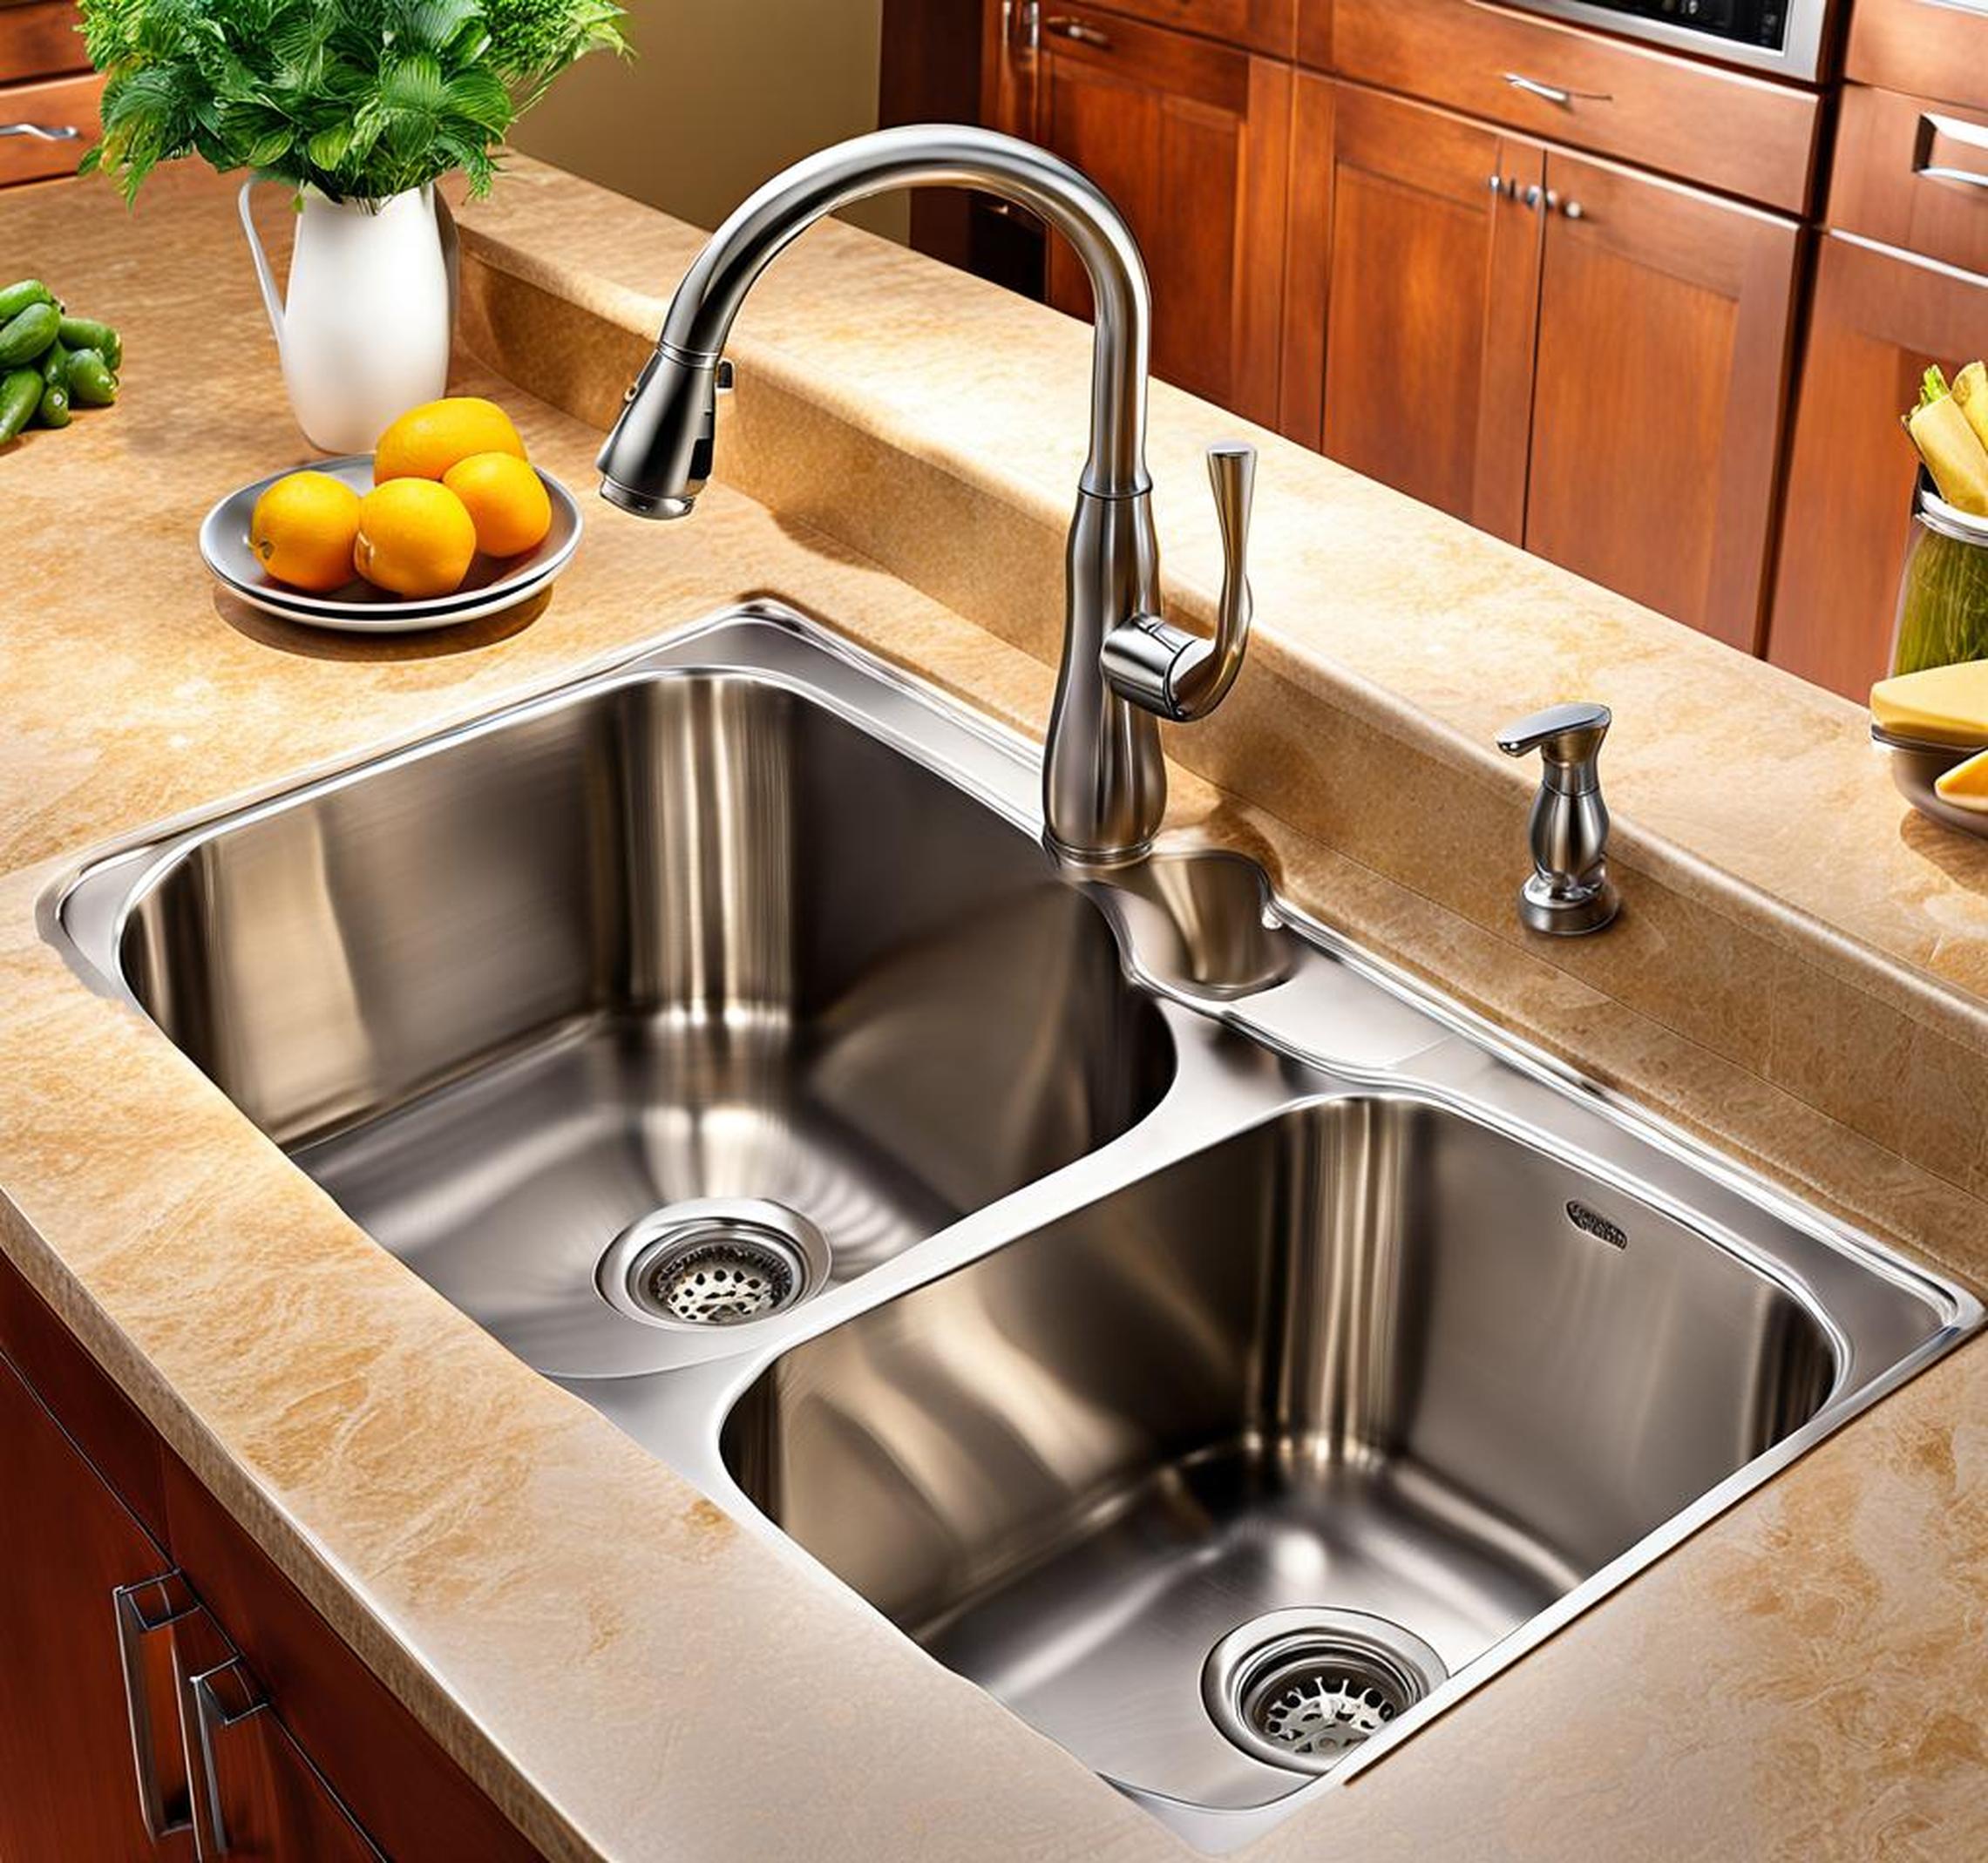 stainless steal kitchen sinks